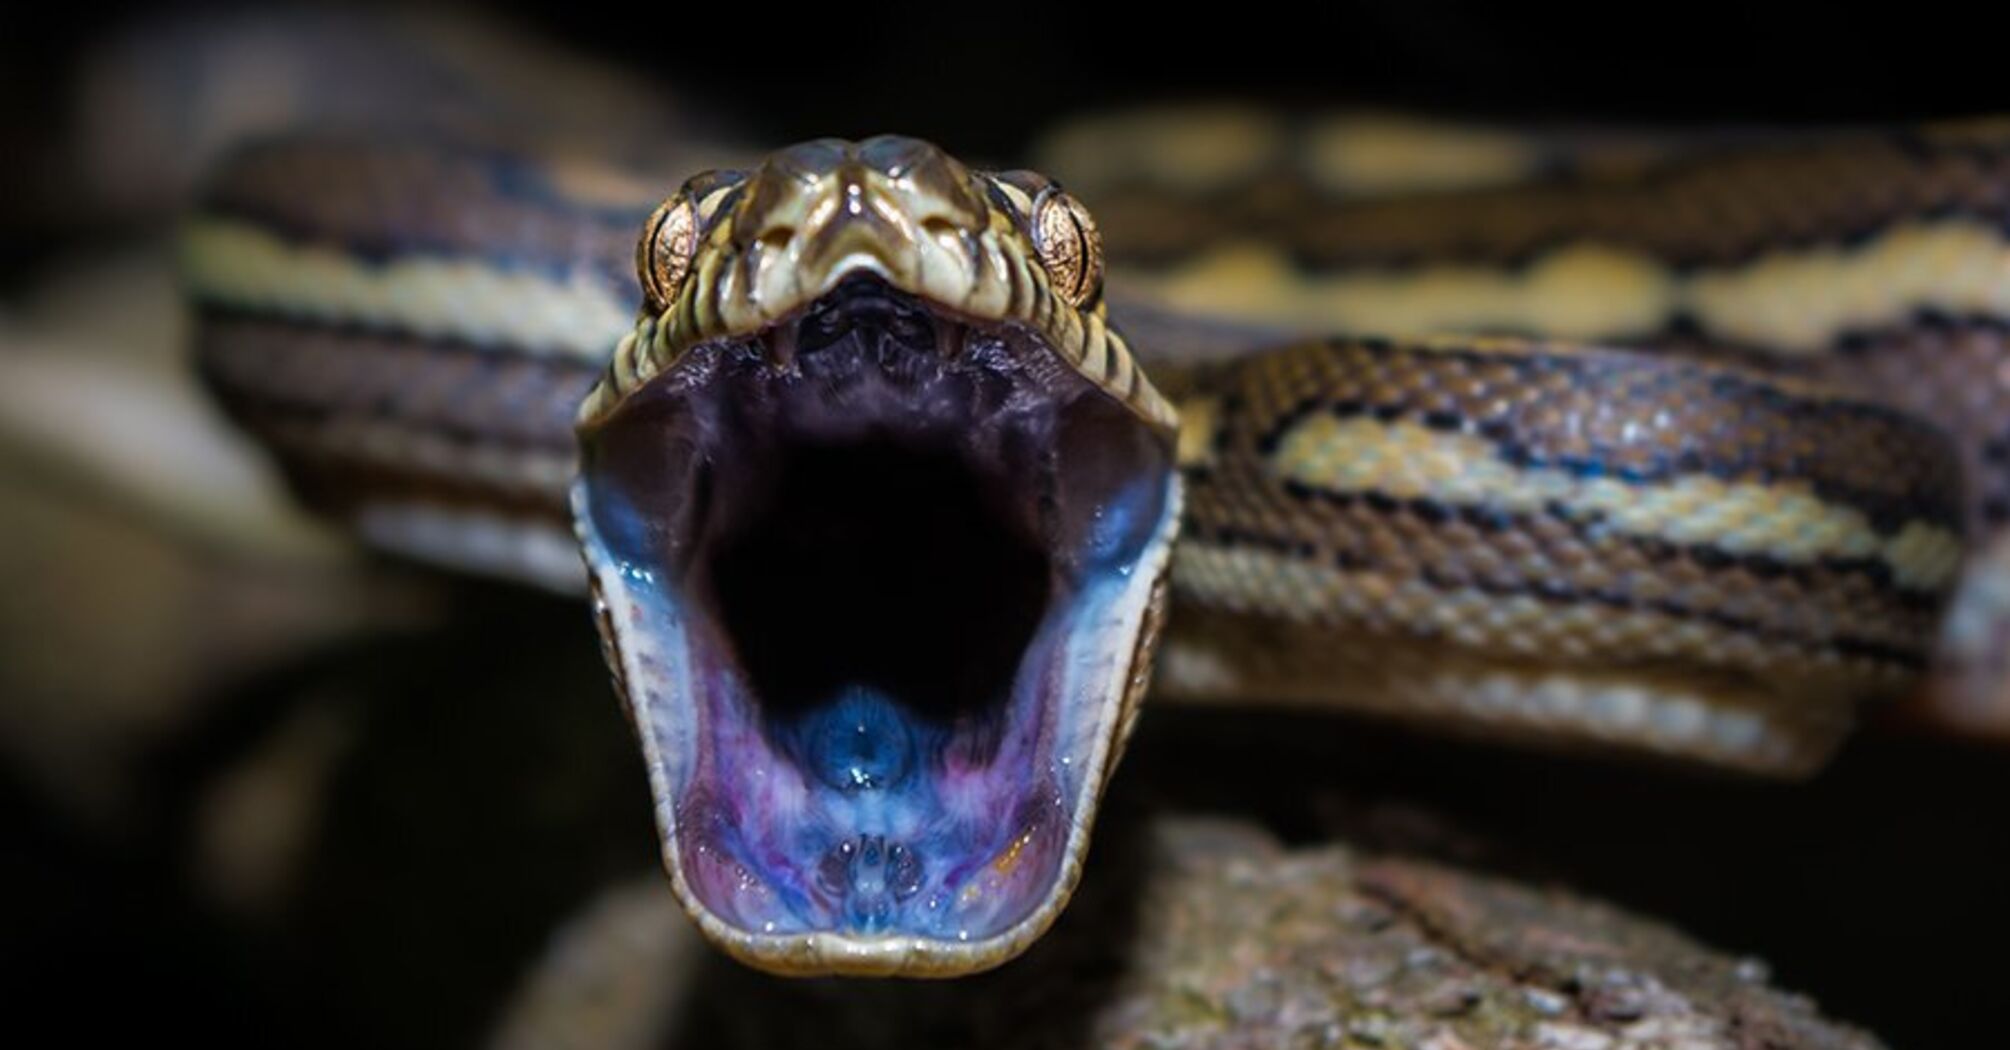 Everything you need to know about snakes